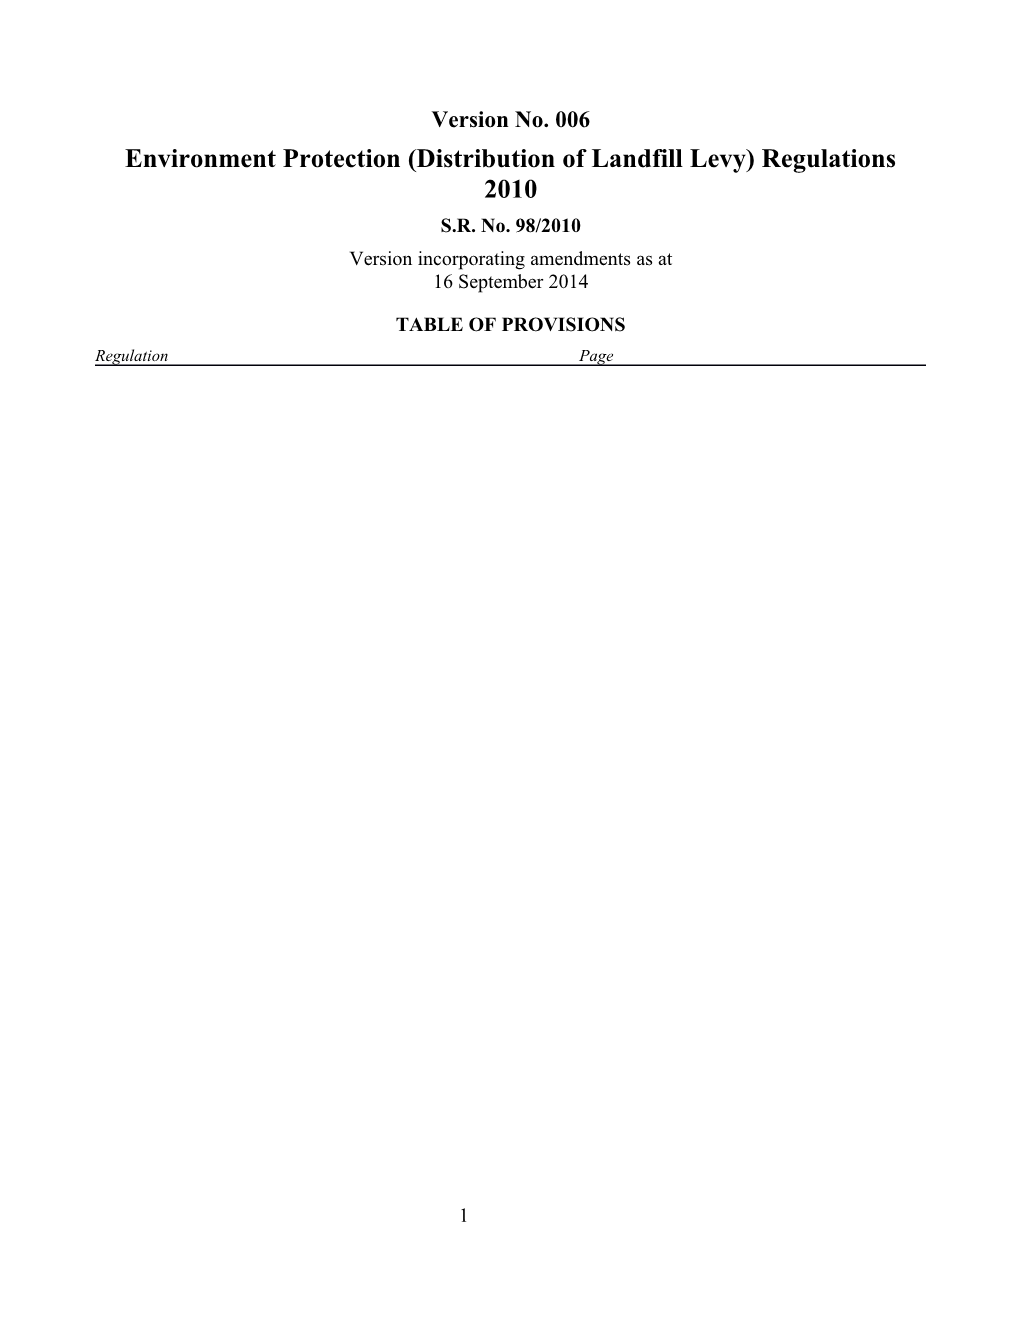 Environment Protection (Distribution of Landfill Levy) Regulations 2010